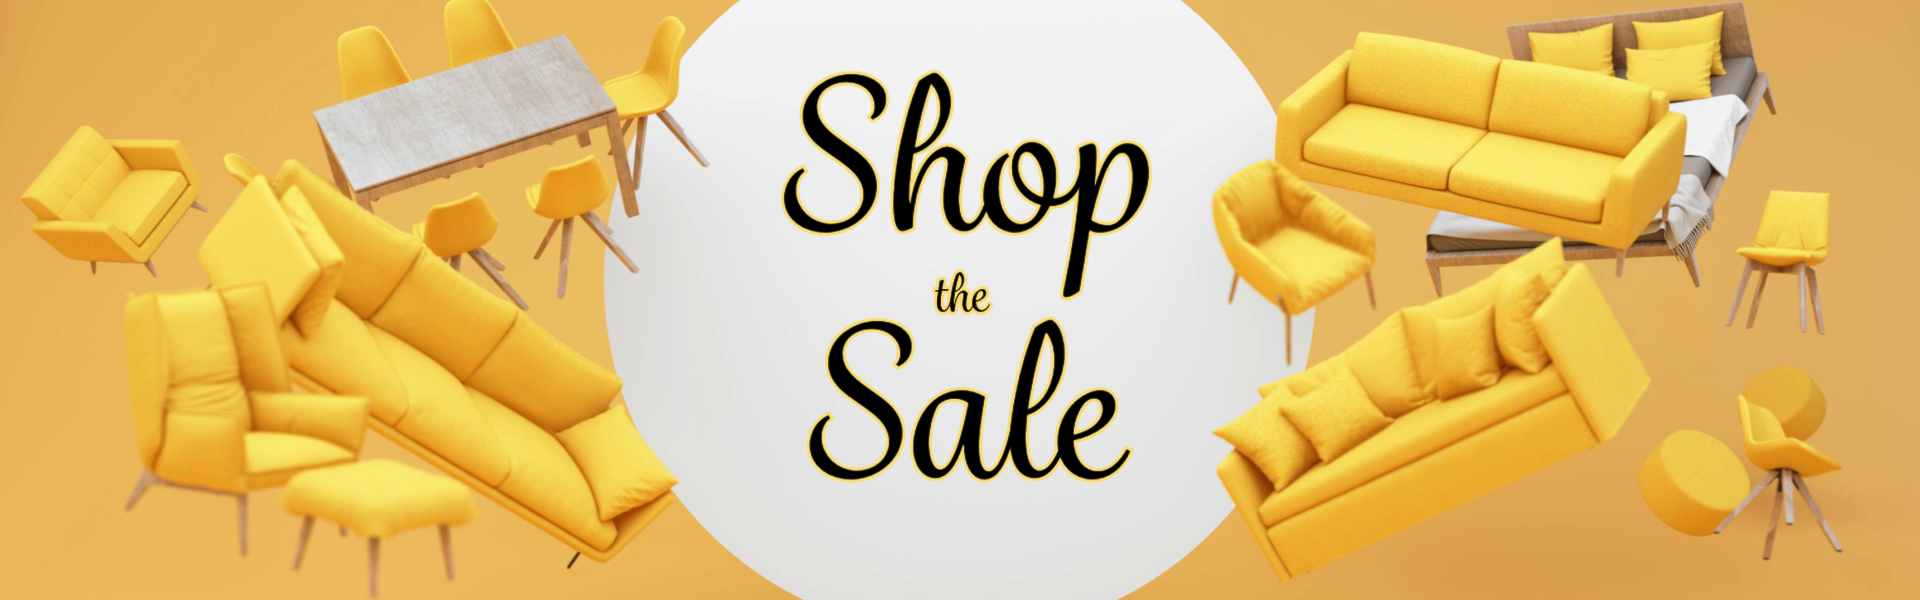 Shop the sale image with yellow furniture and white circle